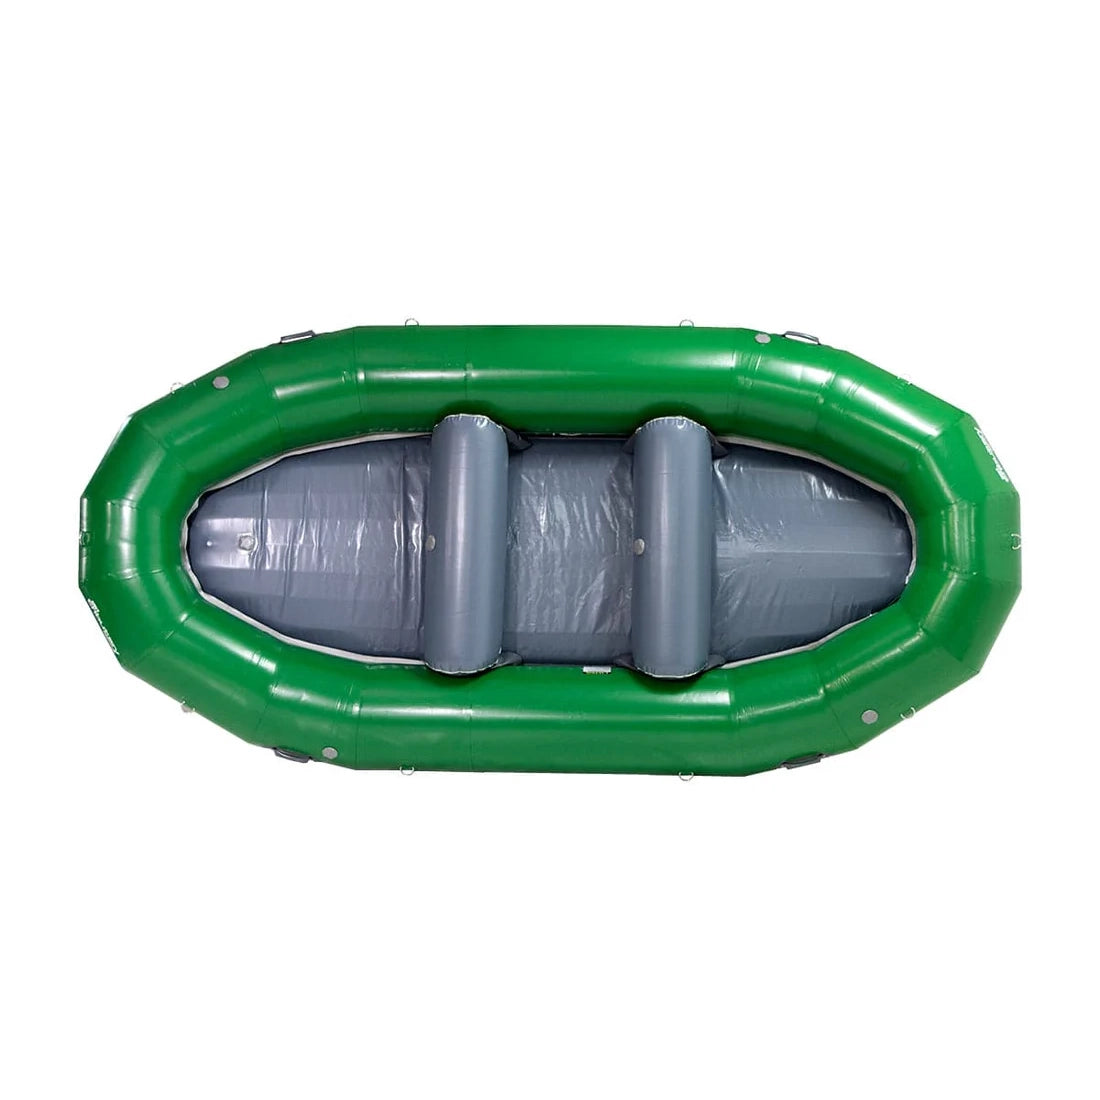 An inflatable green and gray AIRE Tributary HD 12 Self Bailing Raft against a white background, viewed from above.